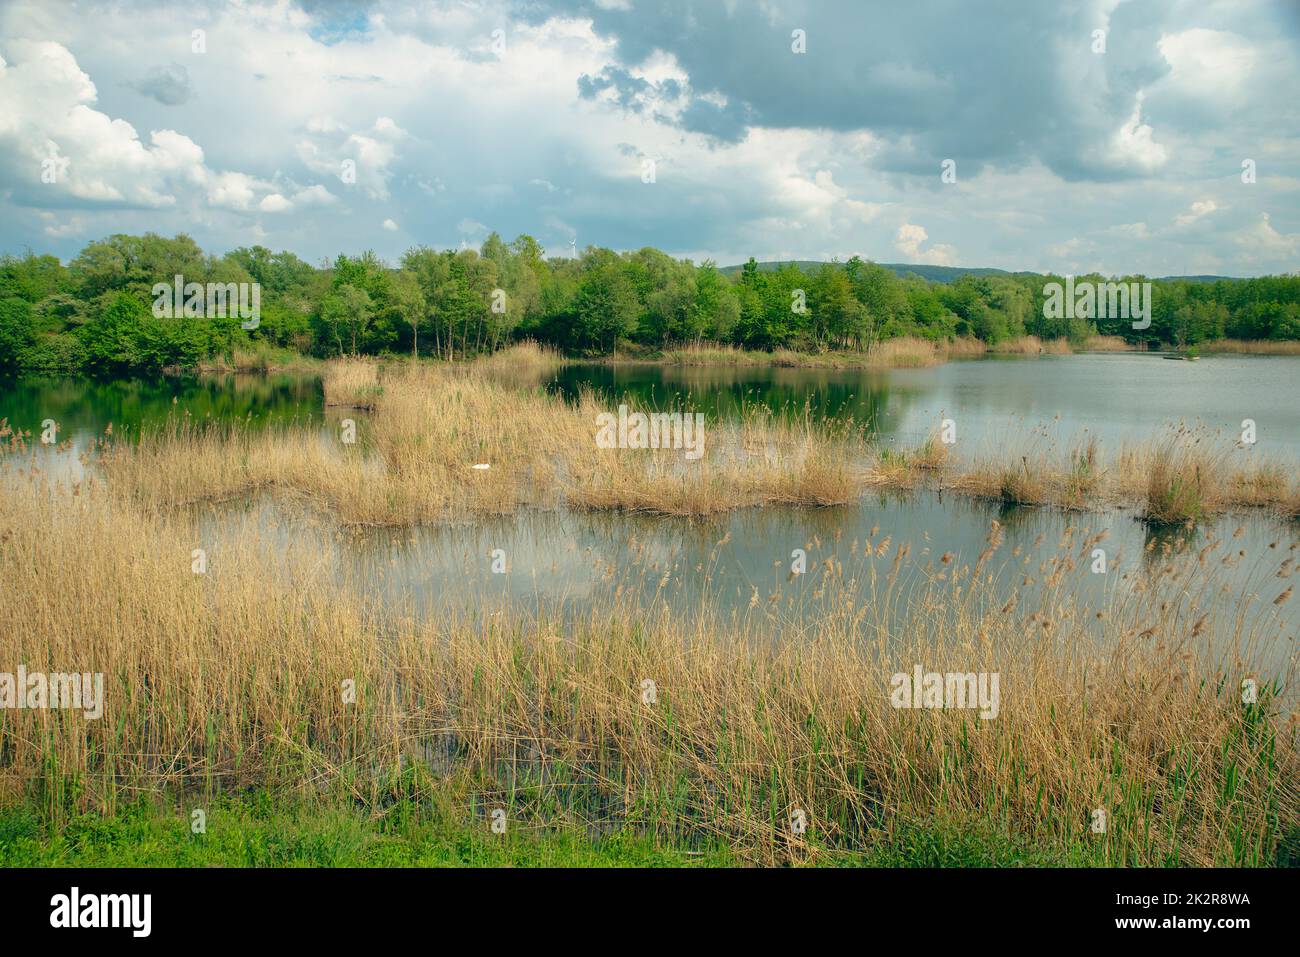 Wetland Haff Reimech in Luxembourg, swamp habitat, nature reserve and biotope Stock Photo